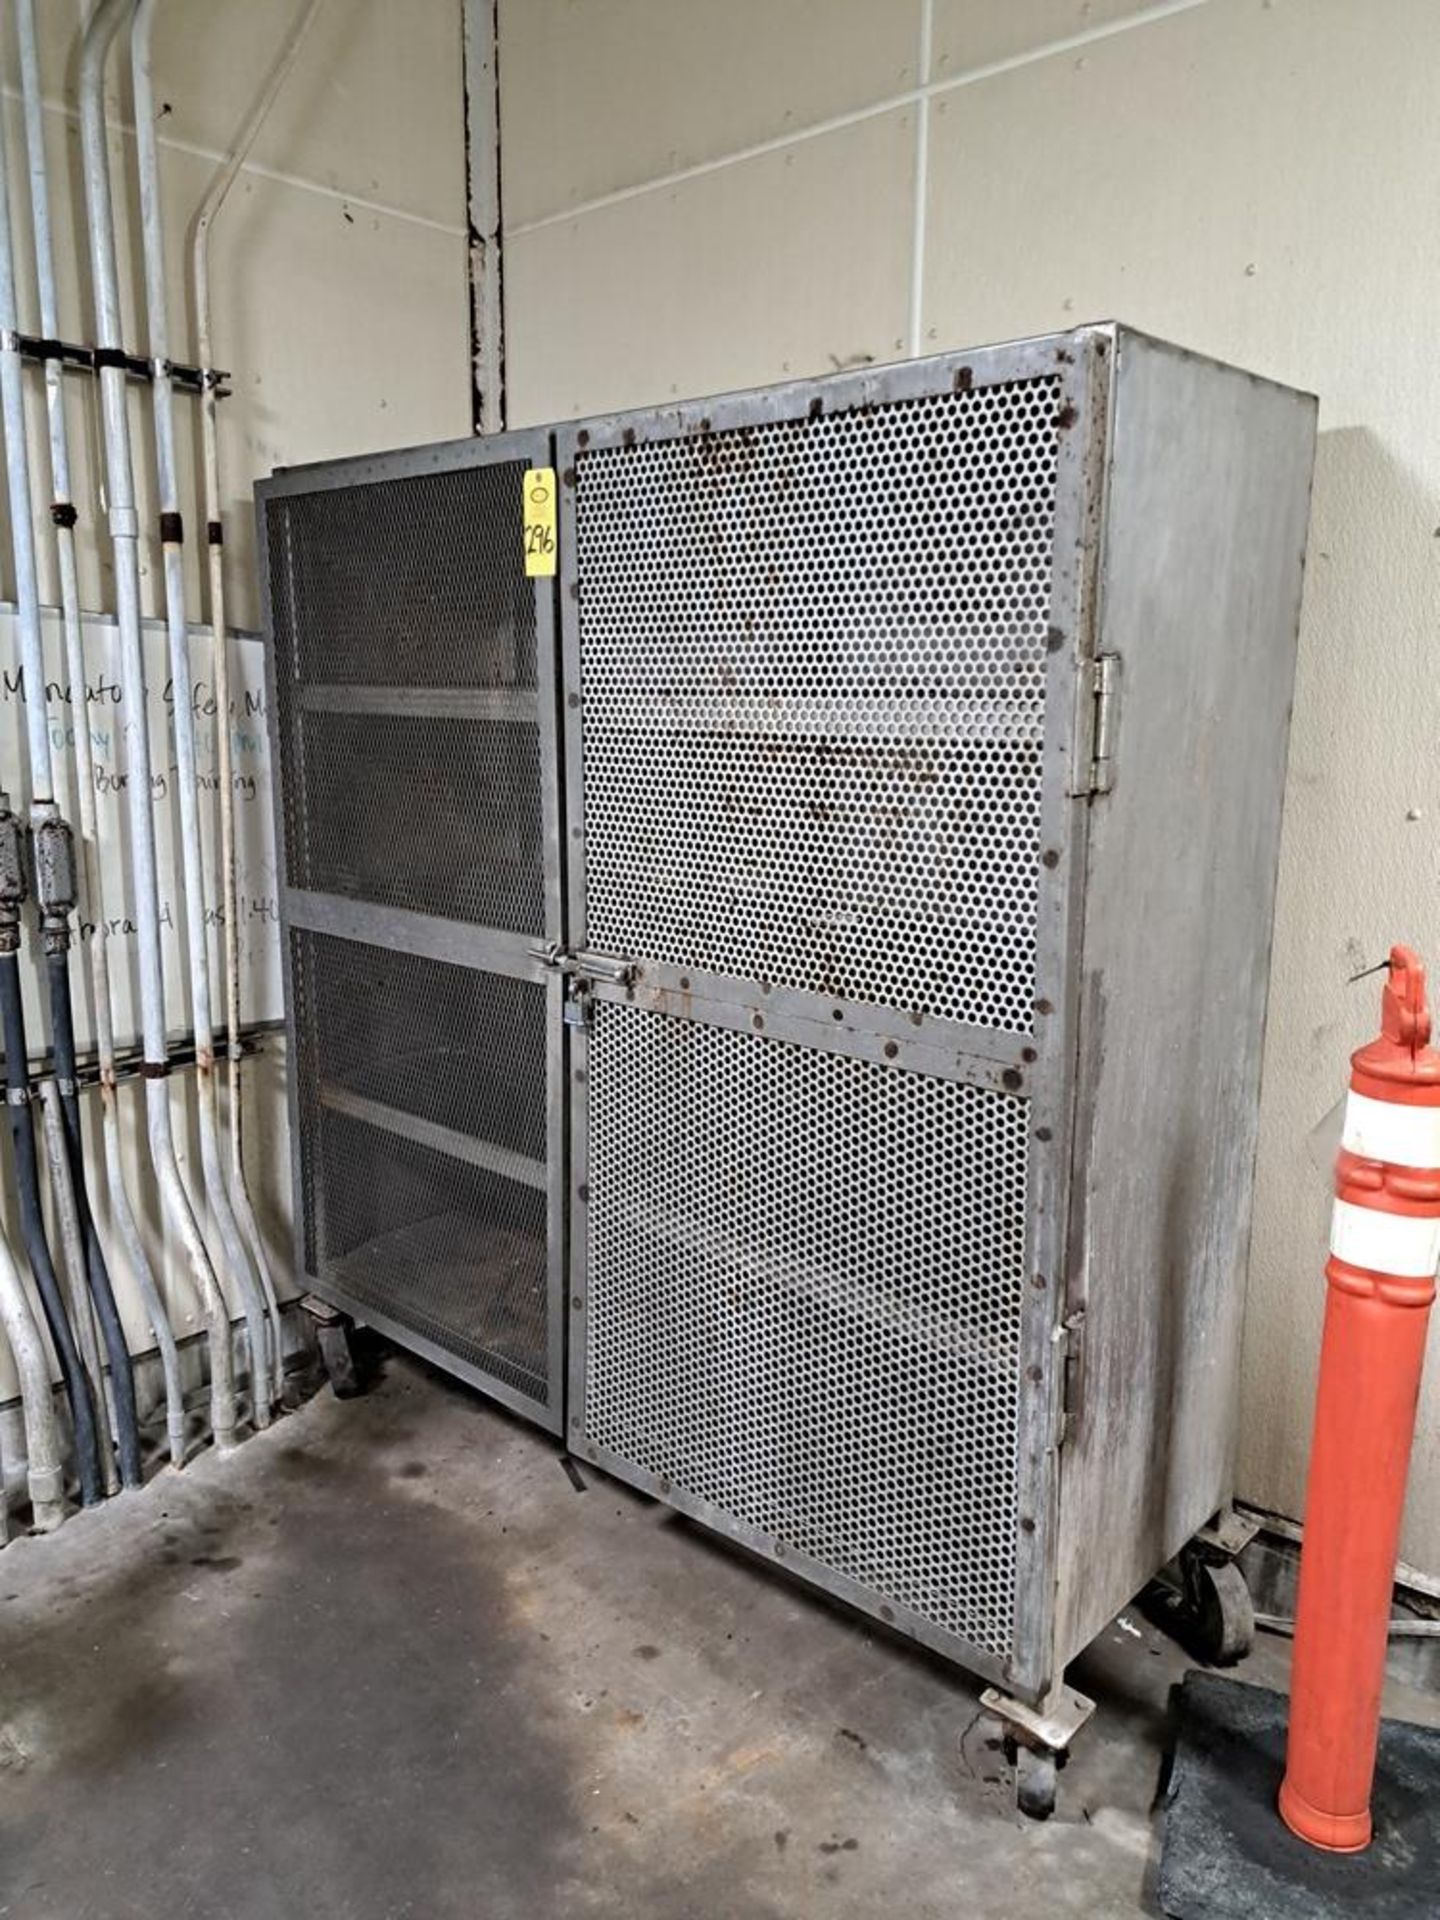 Stainless Steel Portable Cabinet, 6' L X 2' D X 77" T: Required Loading Fee $250.00, Rigger-Norm